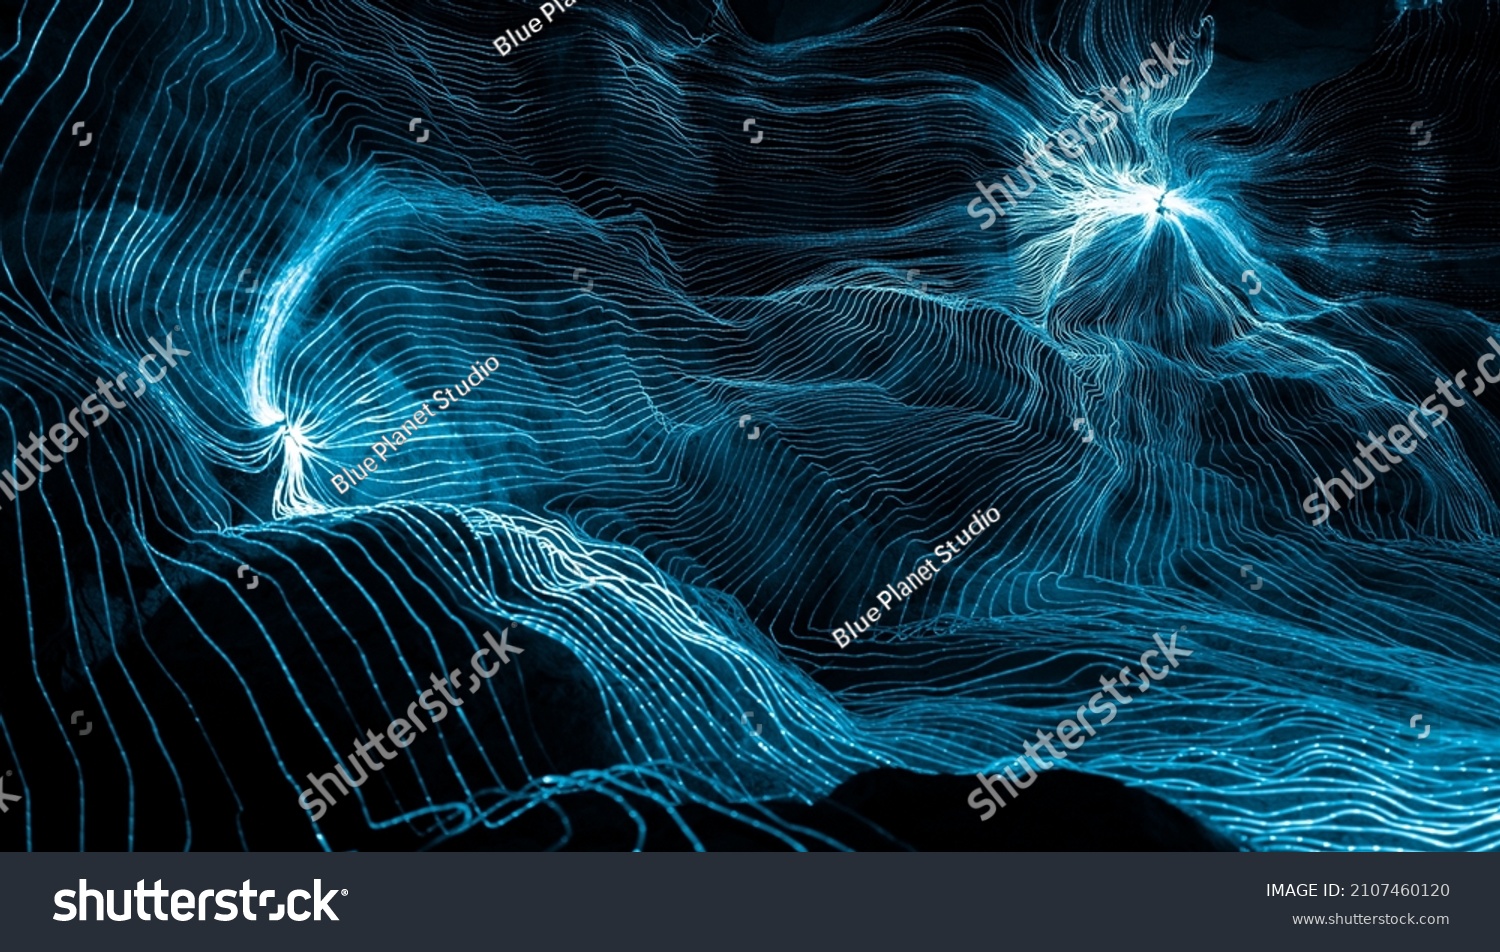 Abstract wave of digital weave lines connecting network dots and dark background . Modern 3D mesh pattern design geometric showing futuristic computer science technology concepts . #2107460120